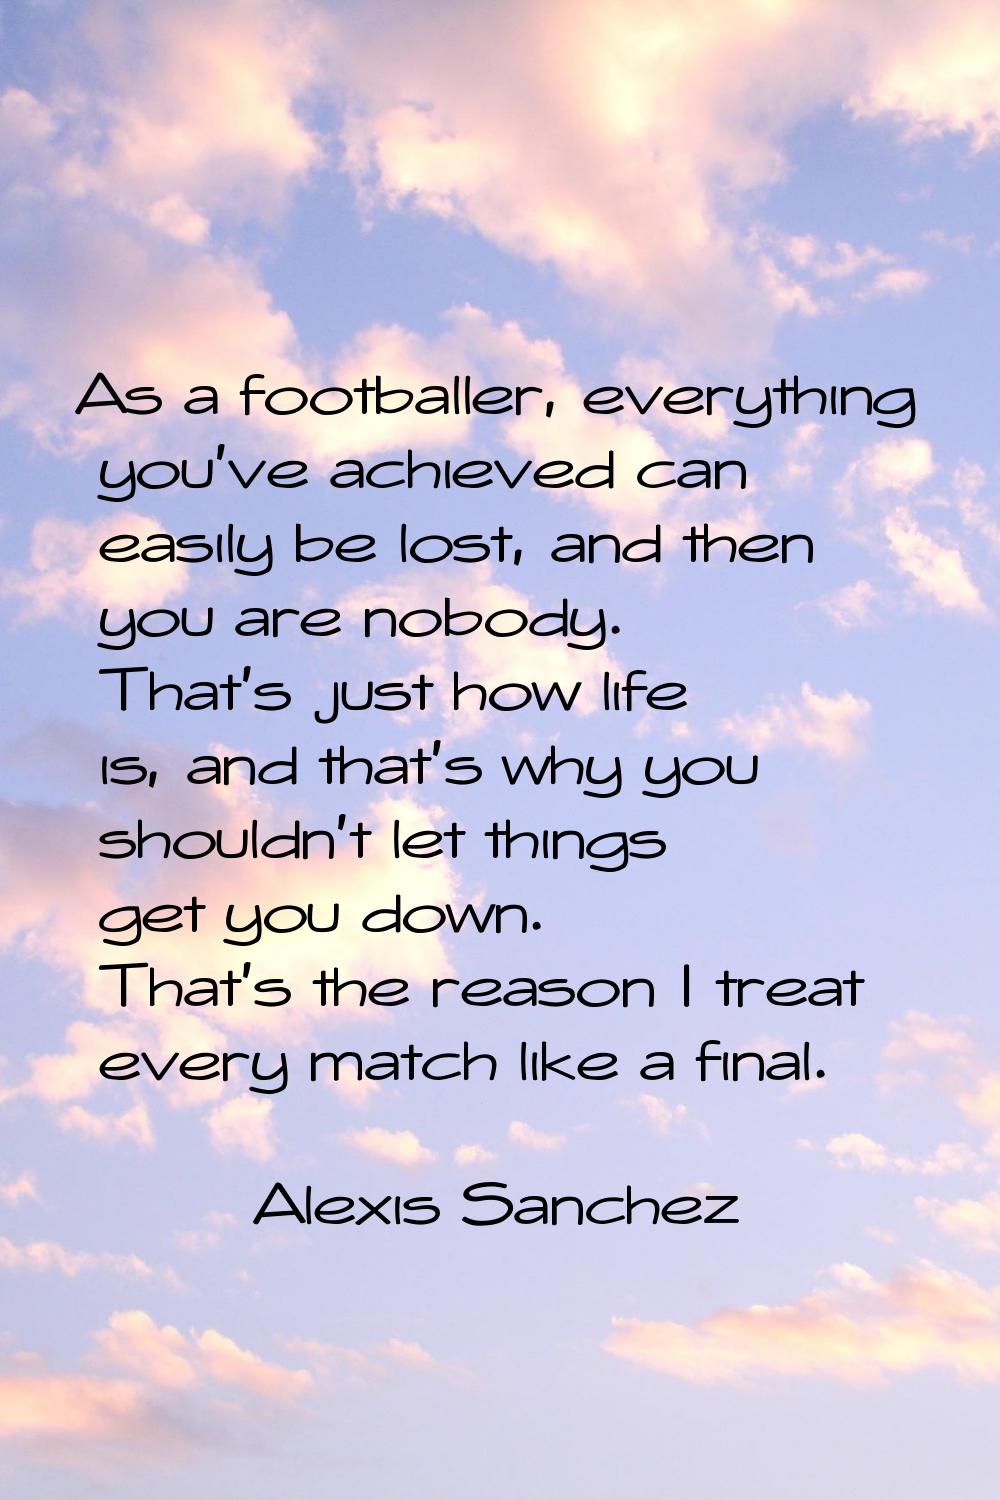 As a footballer, everything you've achieved can easily be lost, and then you are nobody. That's jus